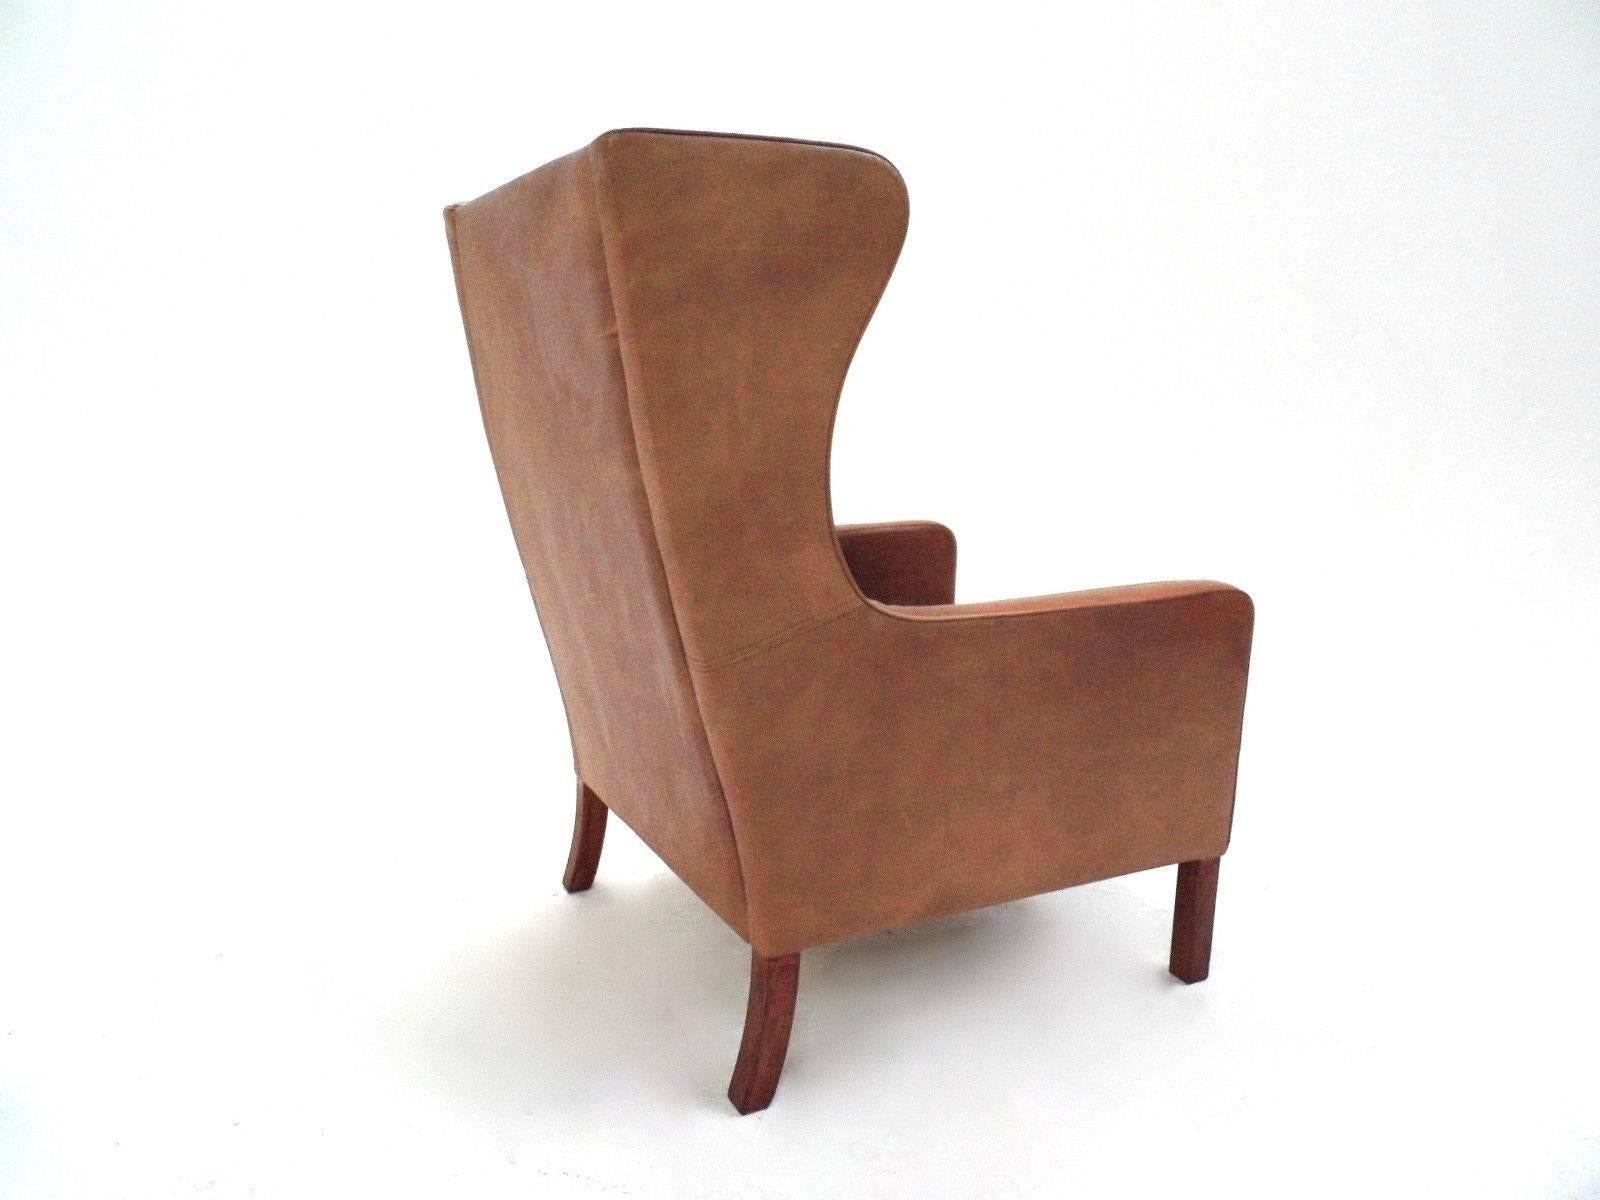 20th Century Danish Stouby Tan Leather High Back Club Armchair Midcentury Chair, 1960s